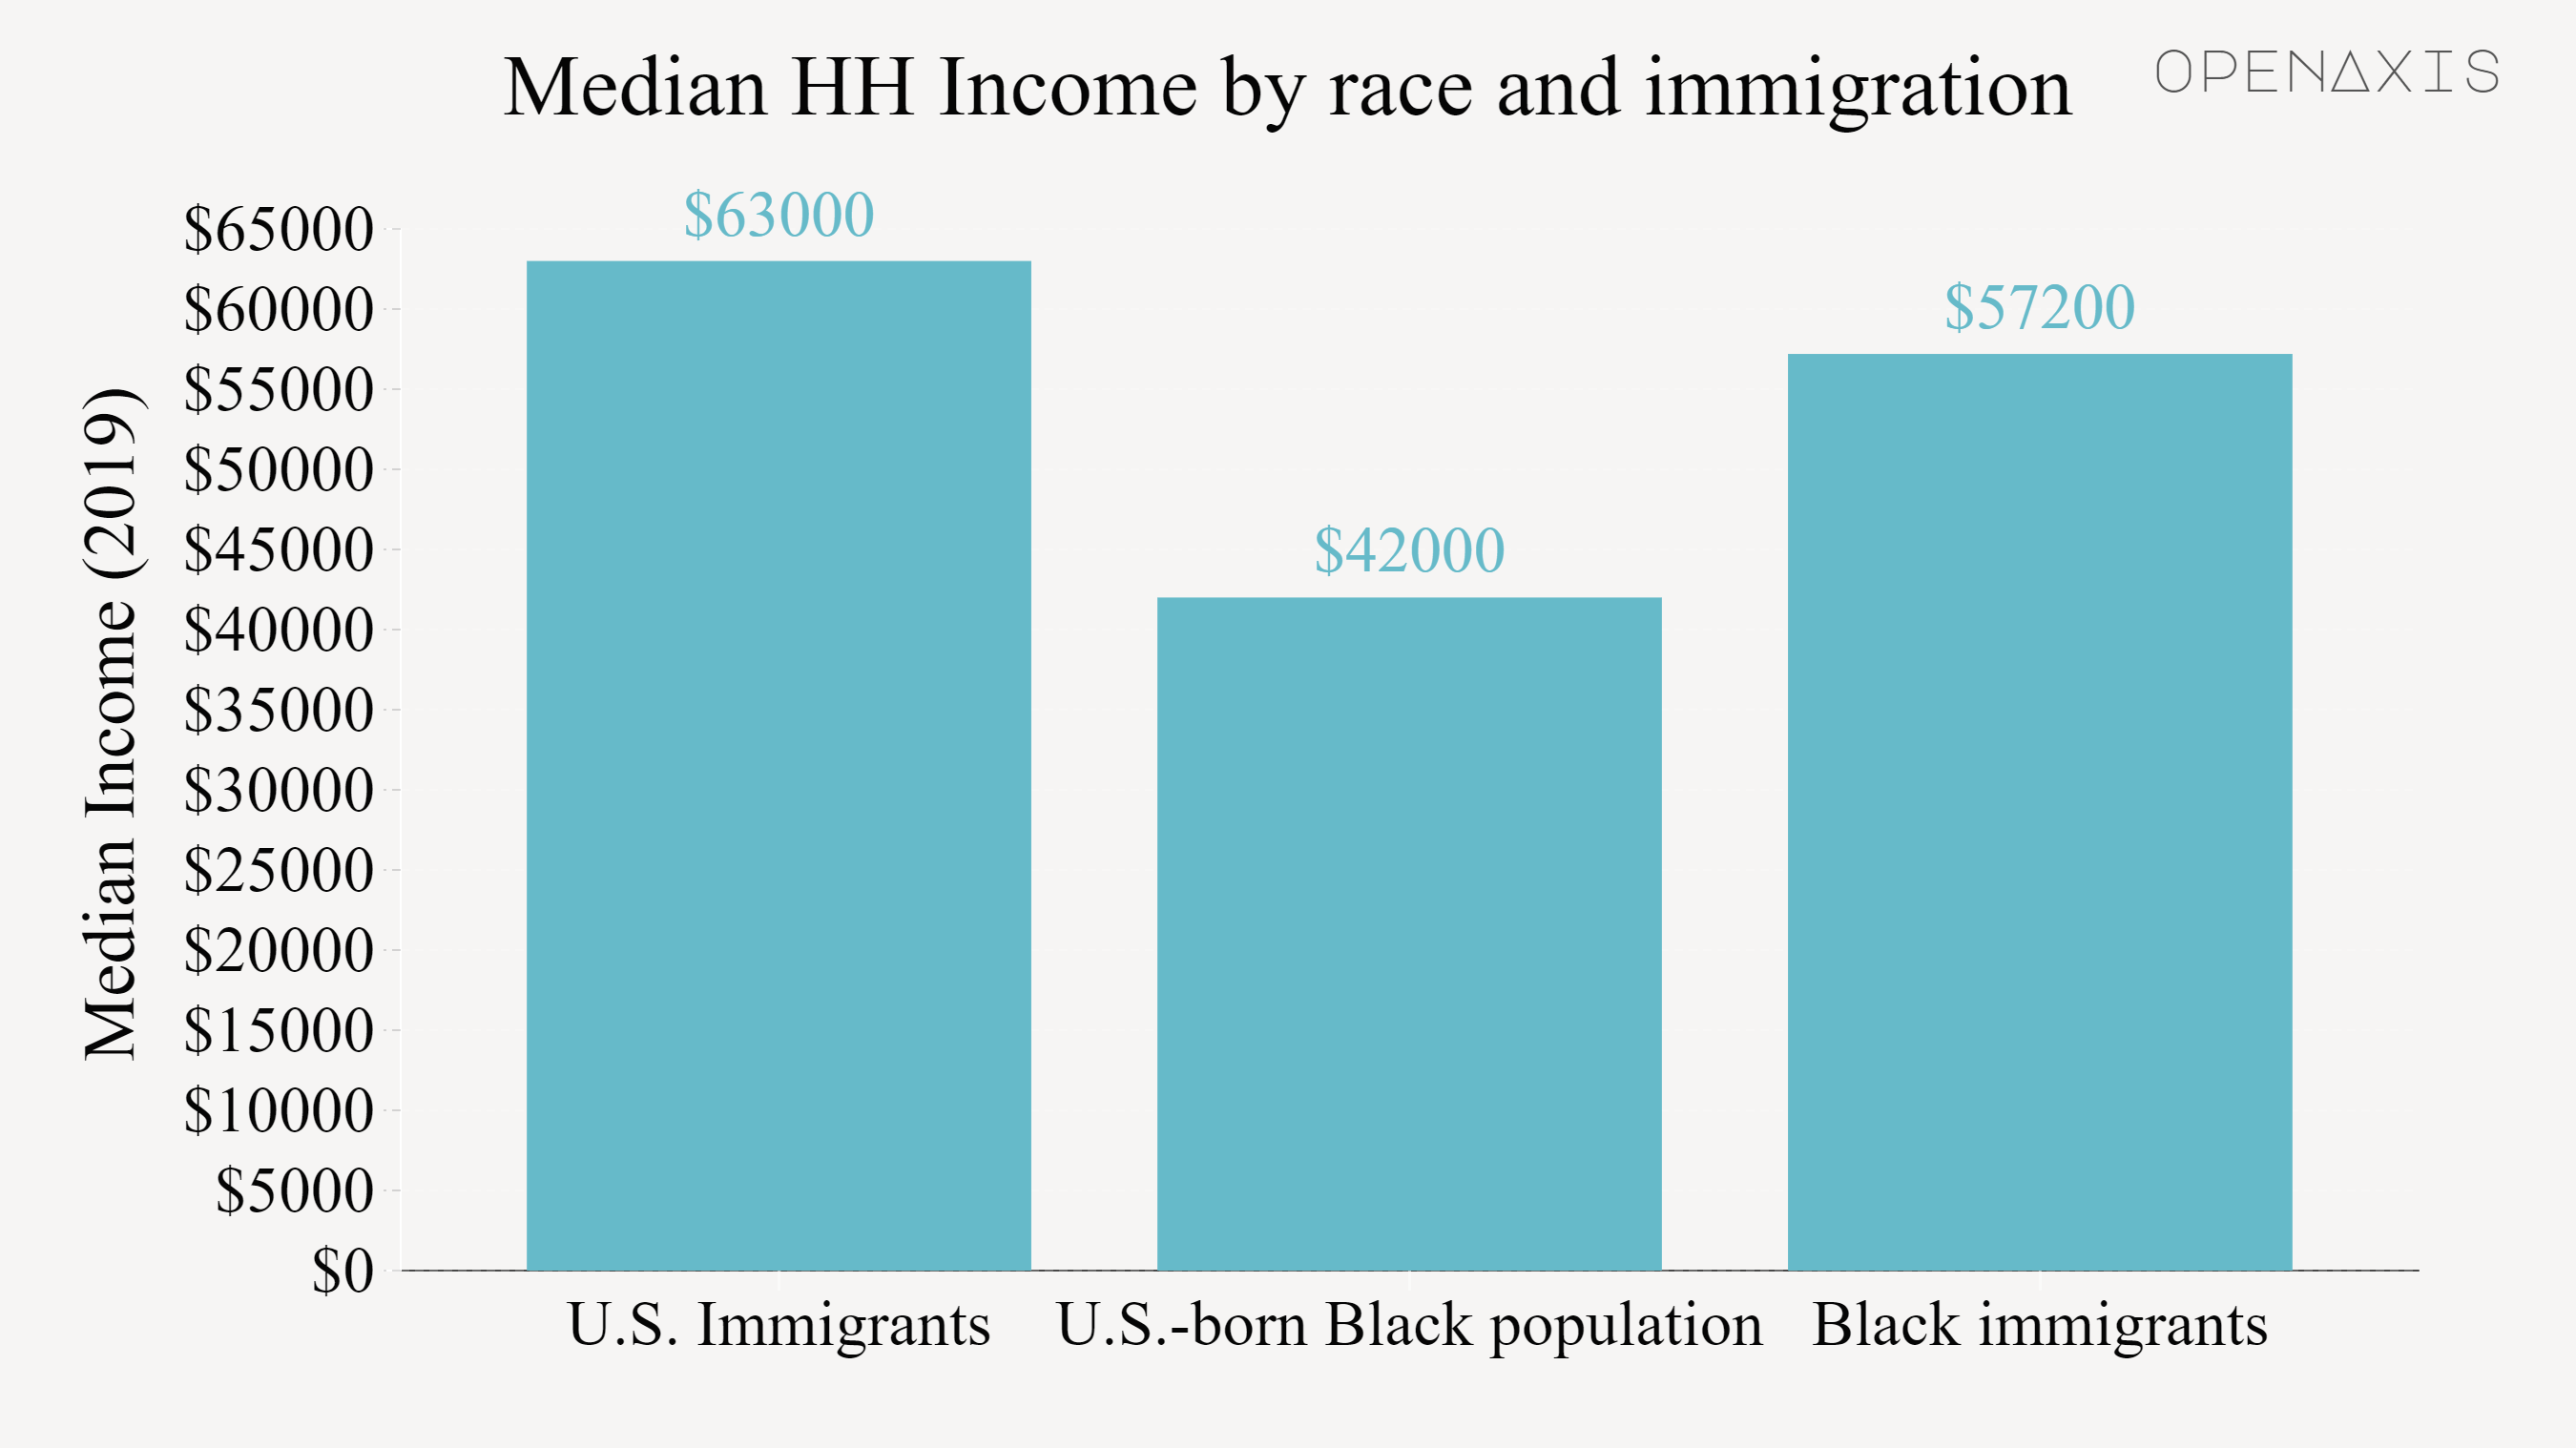 <p>In 2019, Black immigrant-headed households had a lower median income than U.S. immigrant-headed households overall, but a higher median income than households headed by members of the U.S.-born Black population. This pattern has persisted since 2000. That year, the overall immigrant household population’s median income was $58,600, while the Black immigrant household population’s median was $54,700 and the U.S.-born Black household population’s median was $42,500.</p><p><br /></p><p><span data-index="0" data-denotation-char data-id="0" data-value="&lt;a href=&quot;/search?q=%23income&quot; target=_self&gt;#income" data-link="/search?q=%23income">﻿<span contenteditable="false"><span></span><a href="/search?q=%23income" target="_self">#income</a></span>﻿</span> <span data-index="0" data-denotation-char data-id="0" data-value="&lt;a href=&quot;/search?q=%23wealth&quot; target=_self&gt;#wealth" data-link="/search?q=%23wealth">﻿<span contenteditable="false"><span></span><a href="/search?q=%23wealth" target="_self">#wealth</a></span>﻿</span></p><p><br /></p><p>Source: <a href="https://app.openaxis.com/data/3924" target="_blank">Pew Research</a></p><p><br /></p>